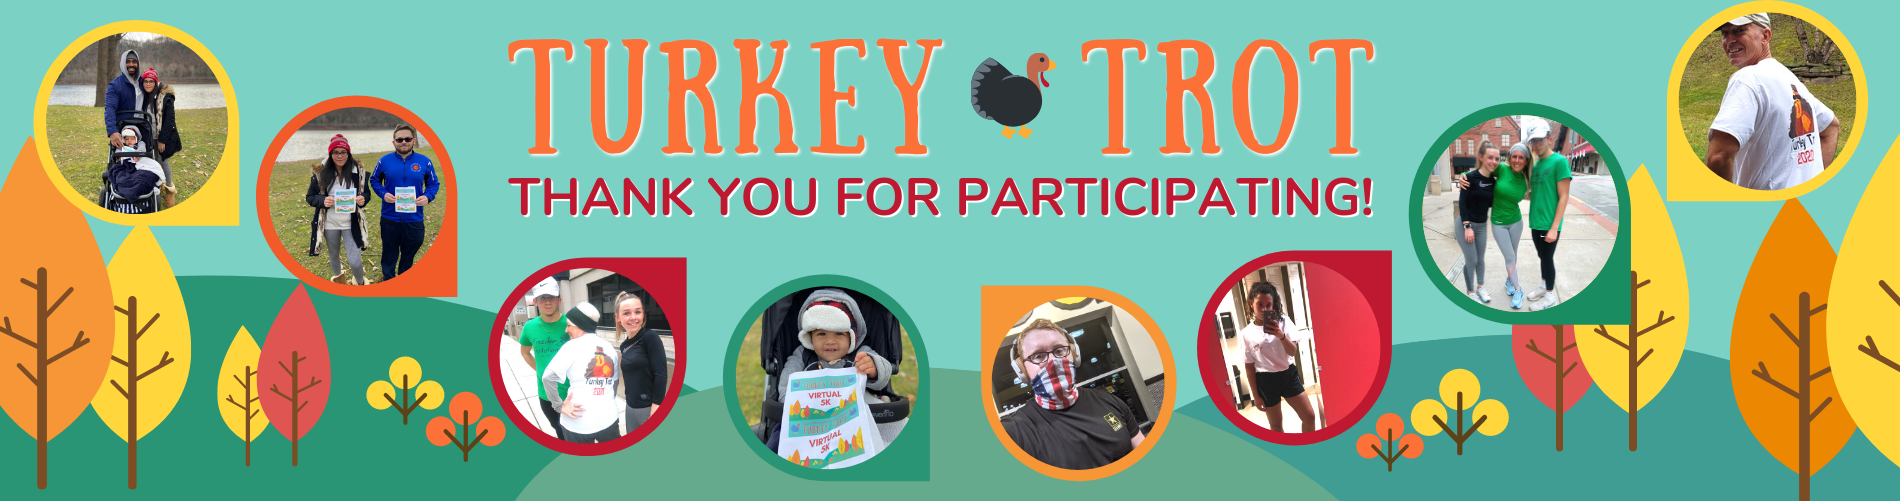 Turkey Trot poster and graphic